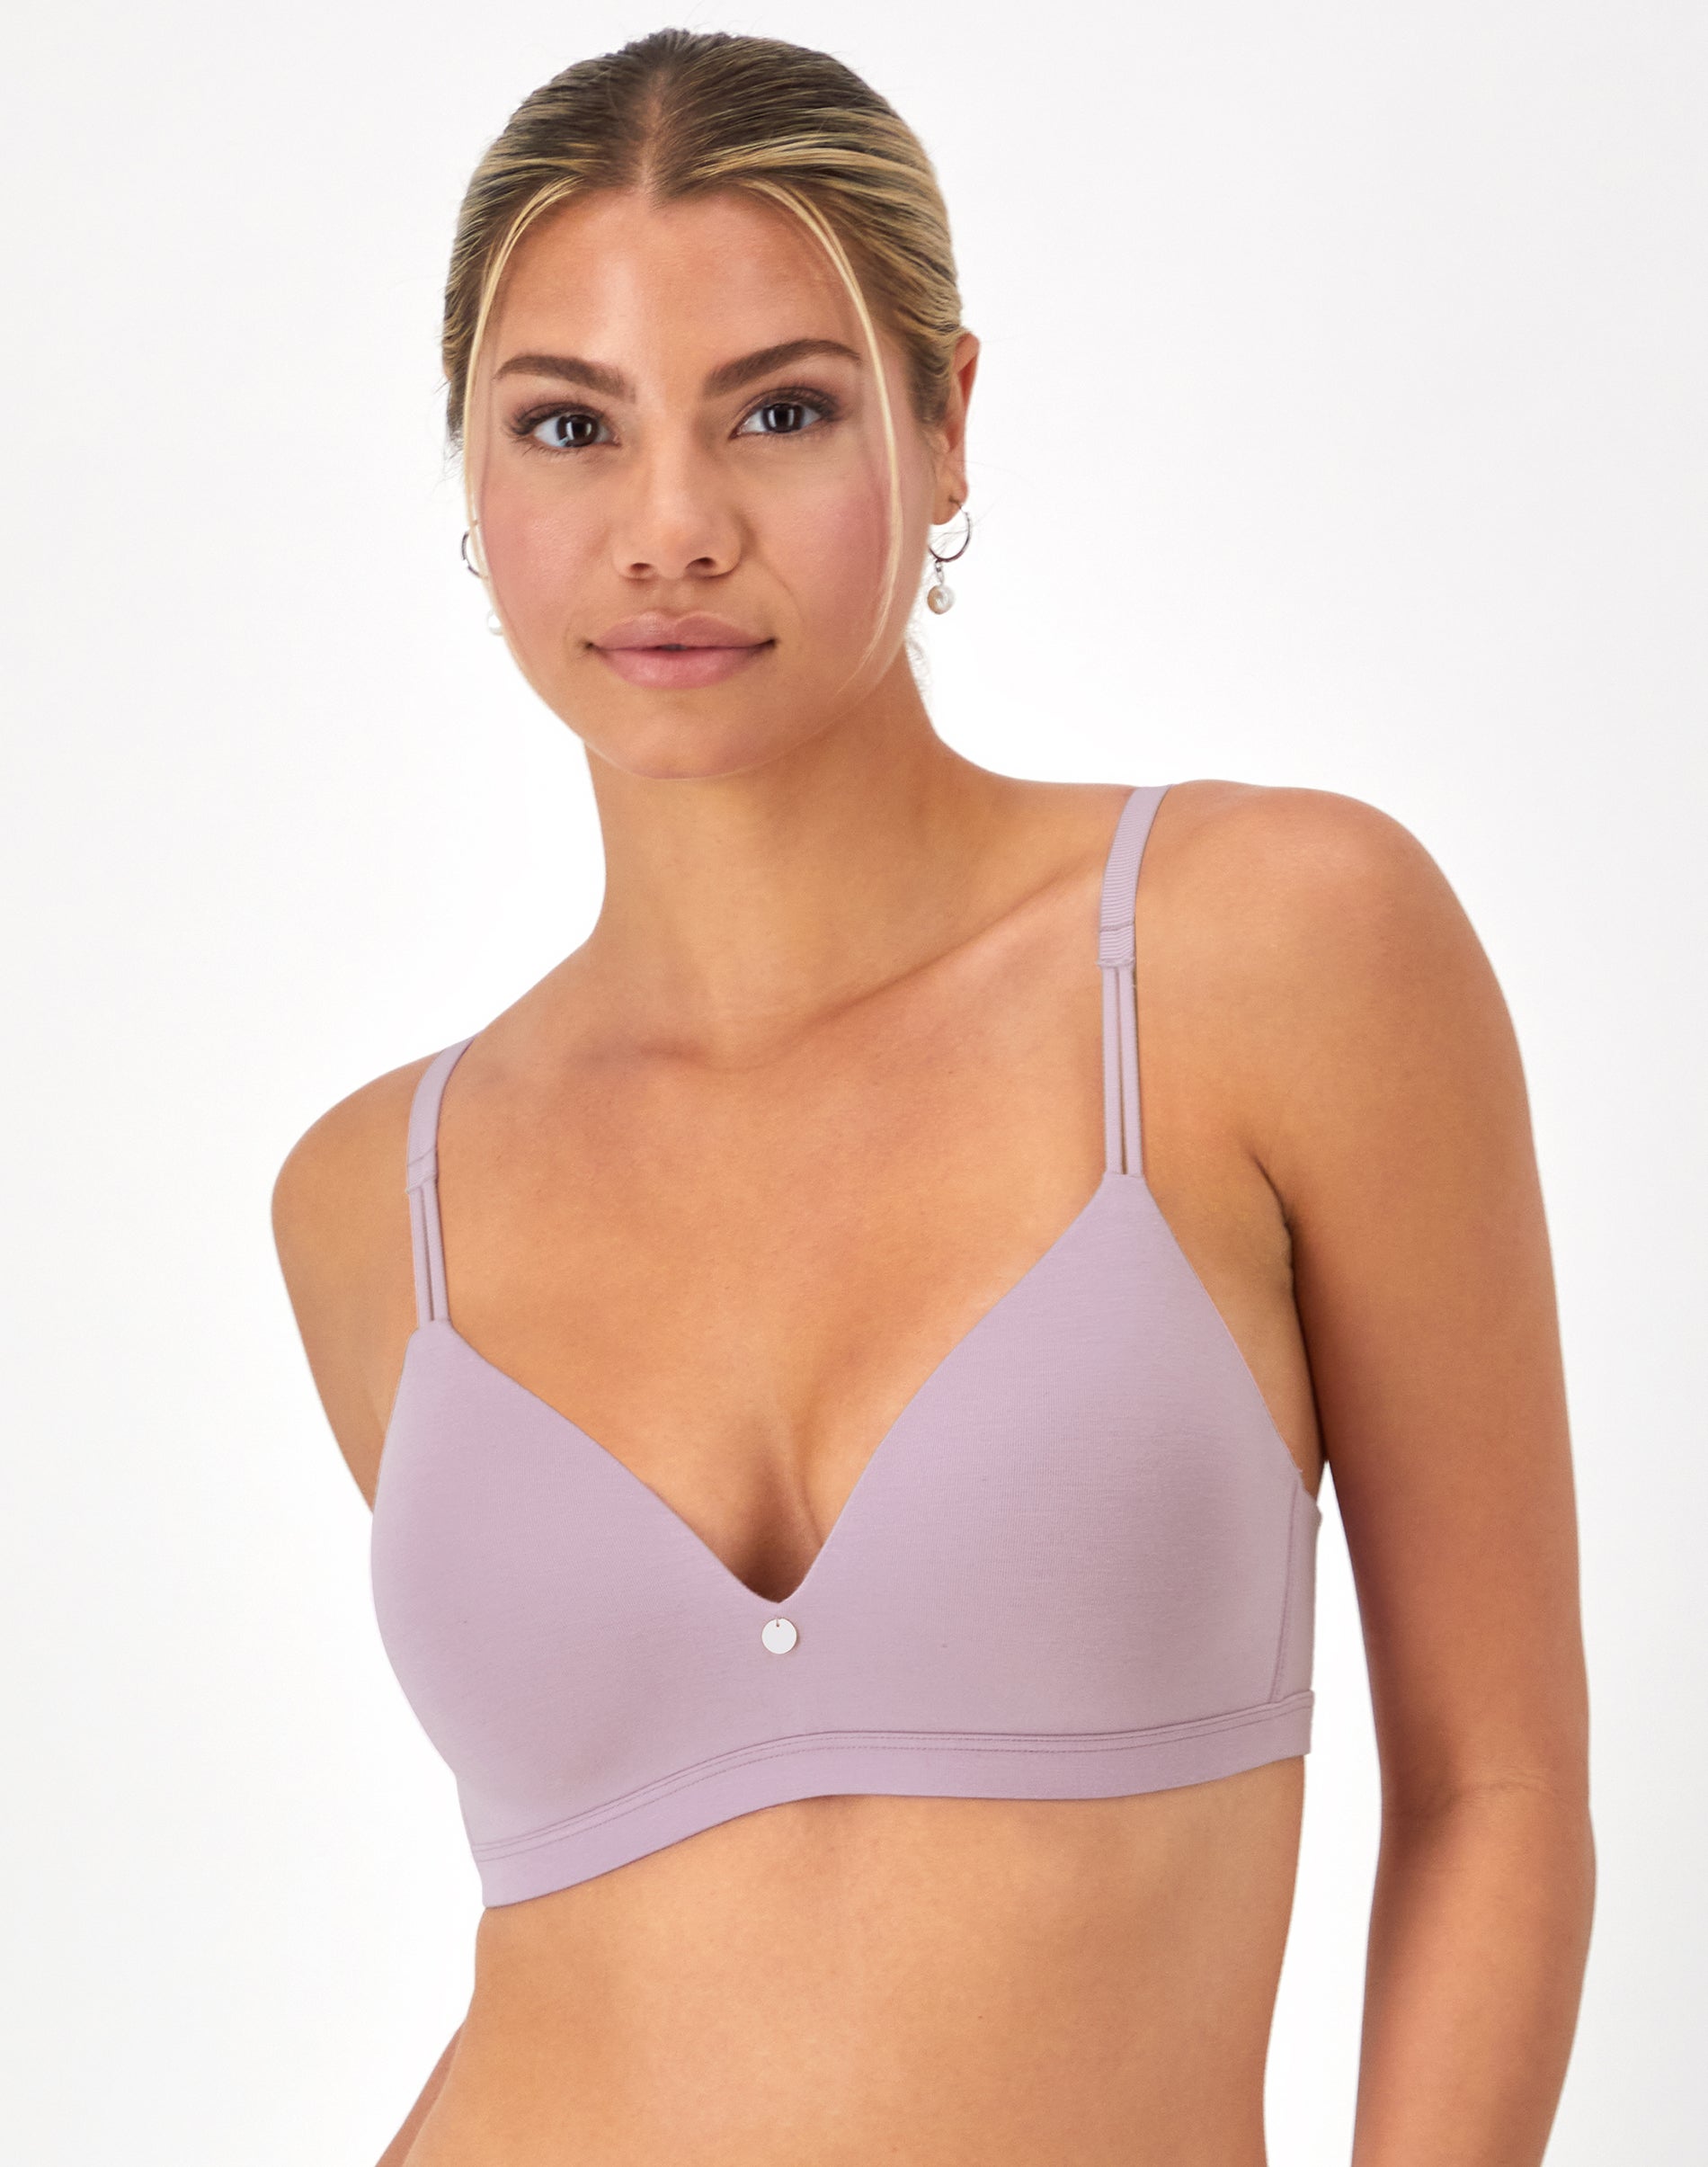 One Hanes Place Maidenform Everyday Luxe Wireless T-Shirt Bra Sojourn Lilac 34C Women’s